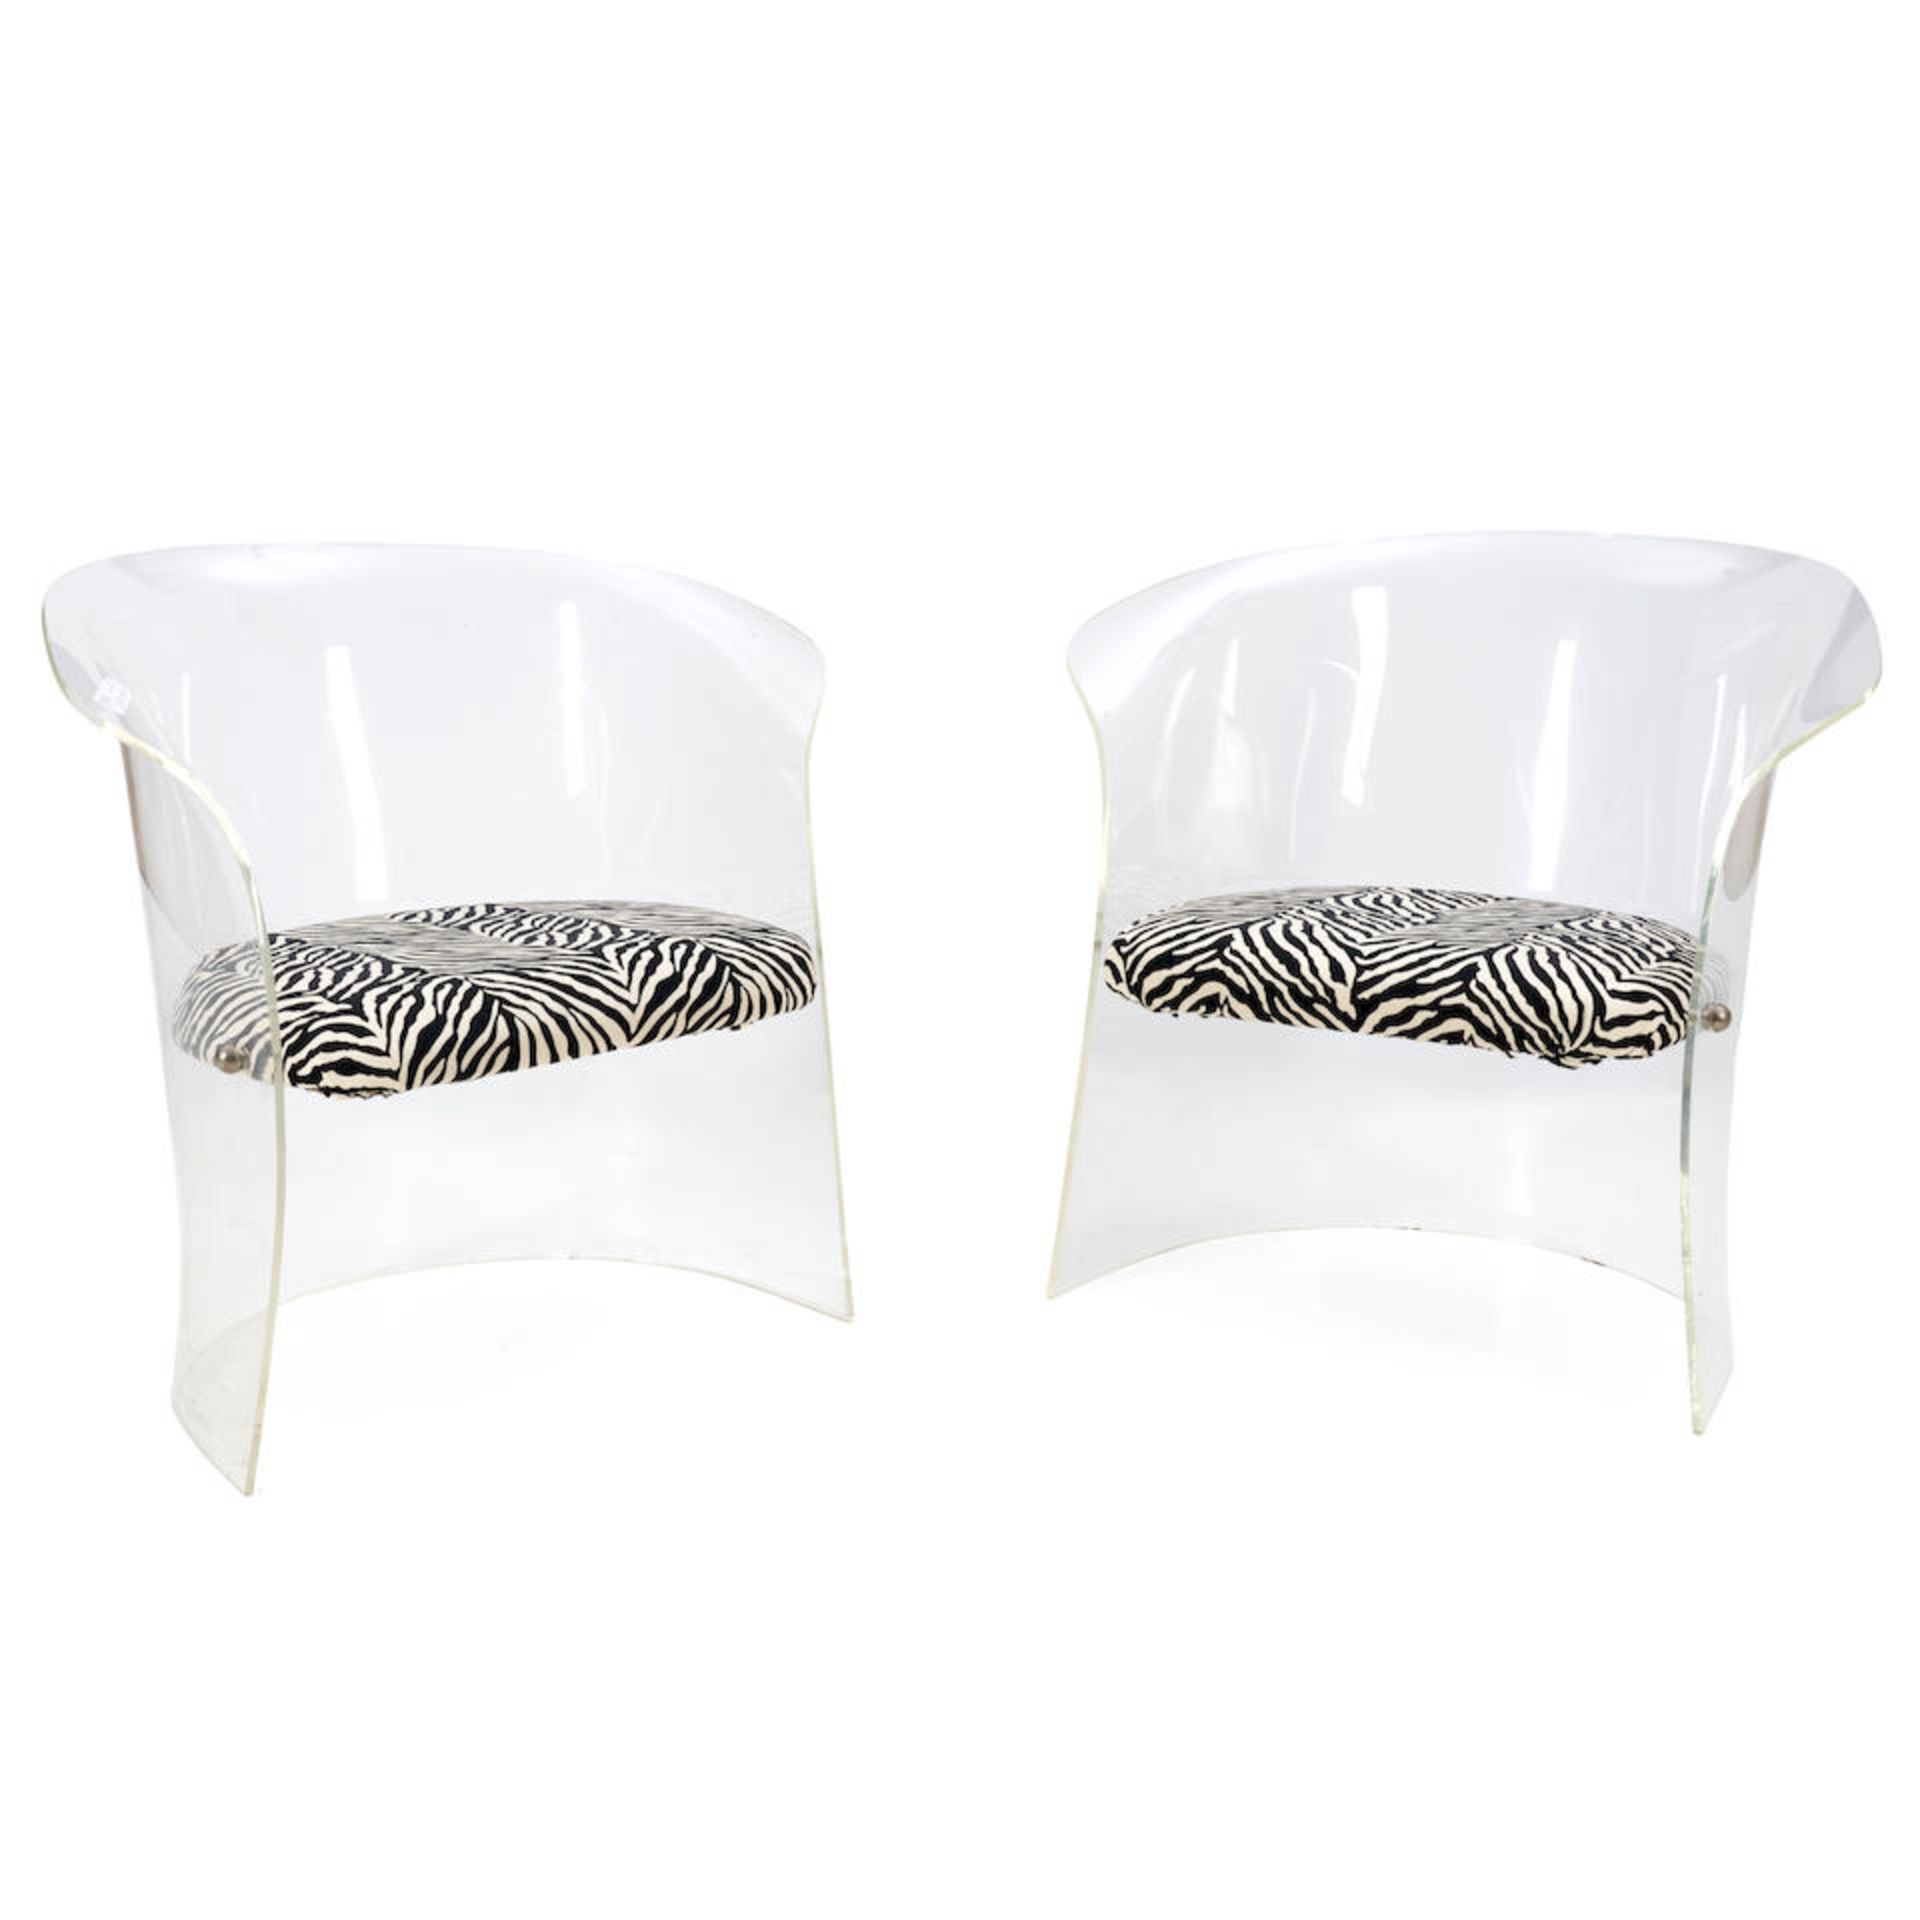 PAIR OF LUCITE BARREL CHAIR WITH ZEBRA-PRINT PATTERNED UPHOLSTERY SEAT